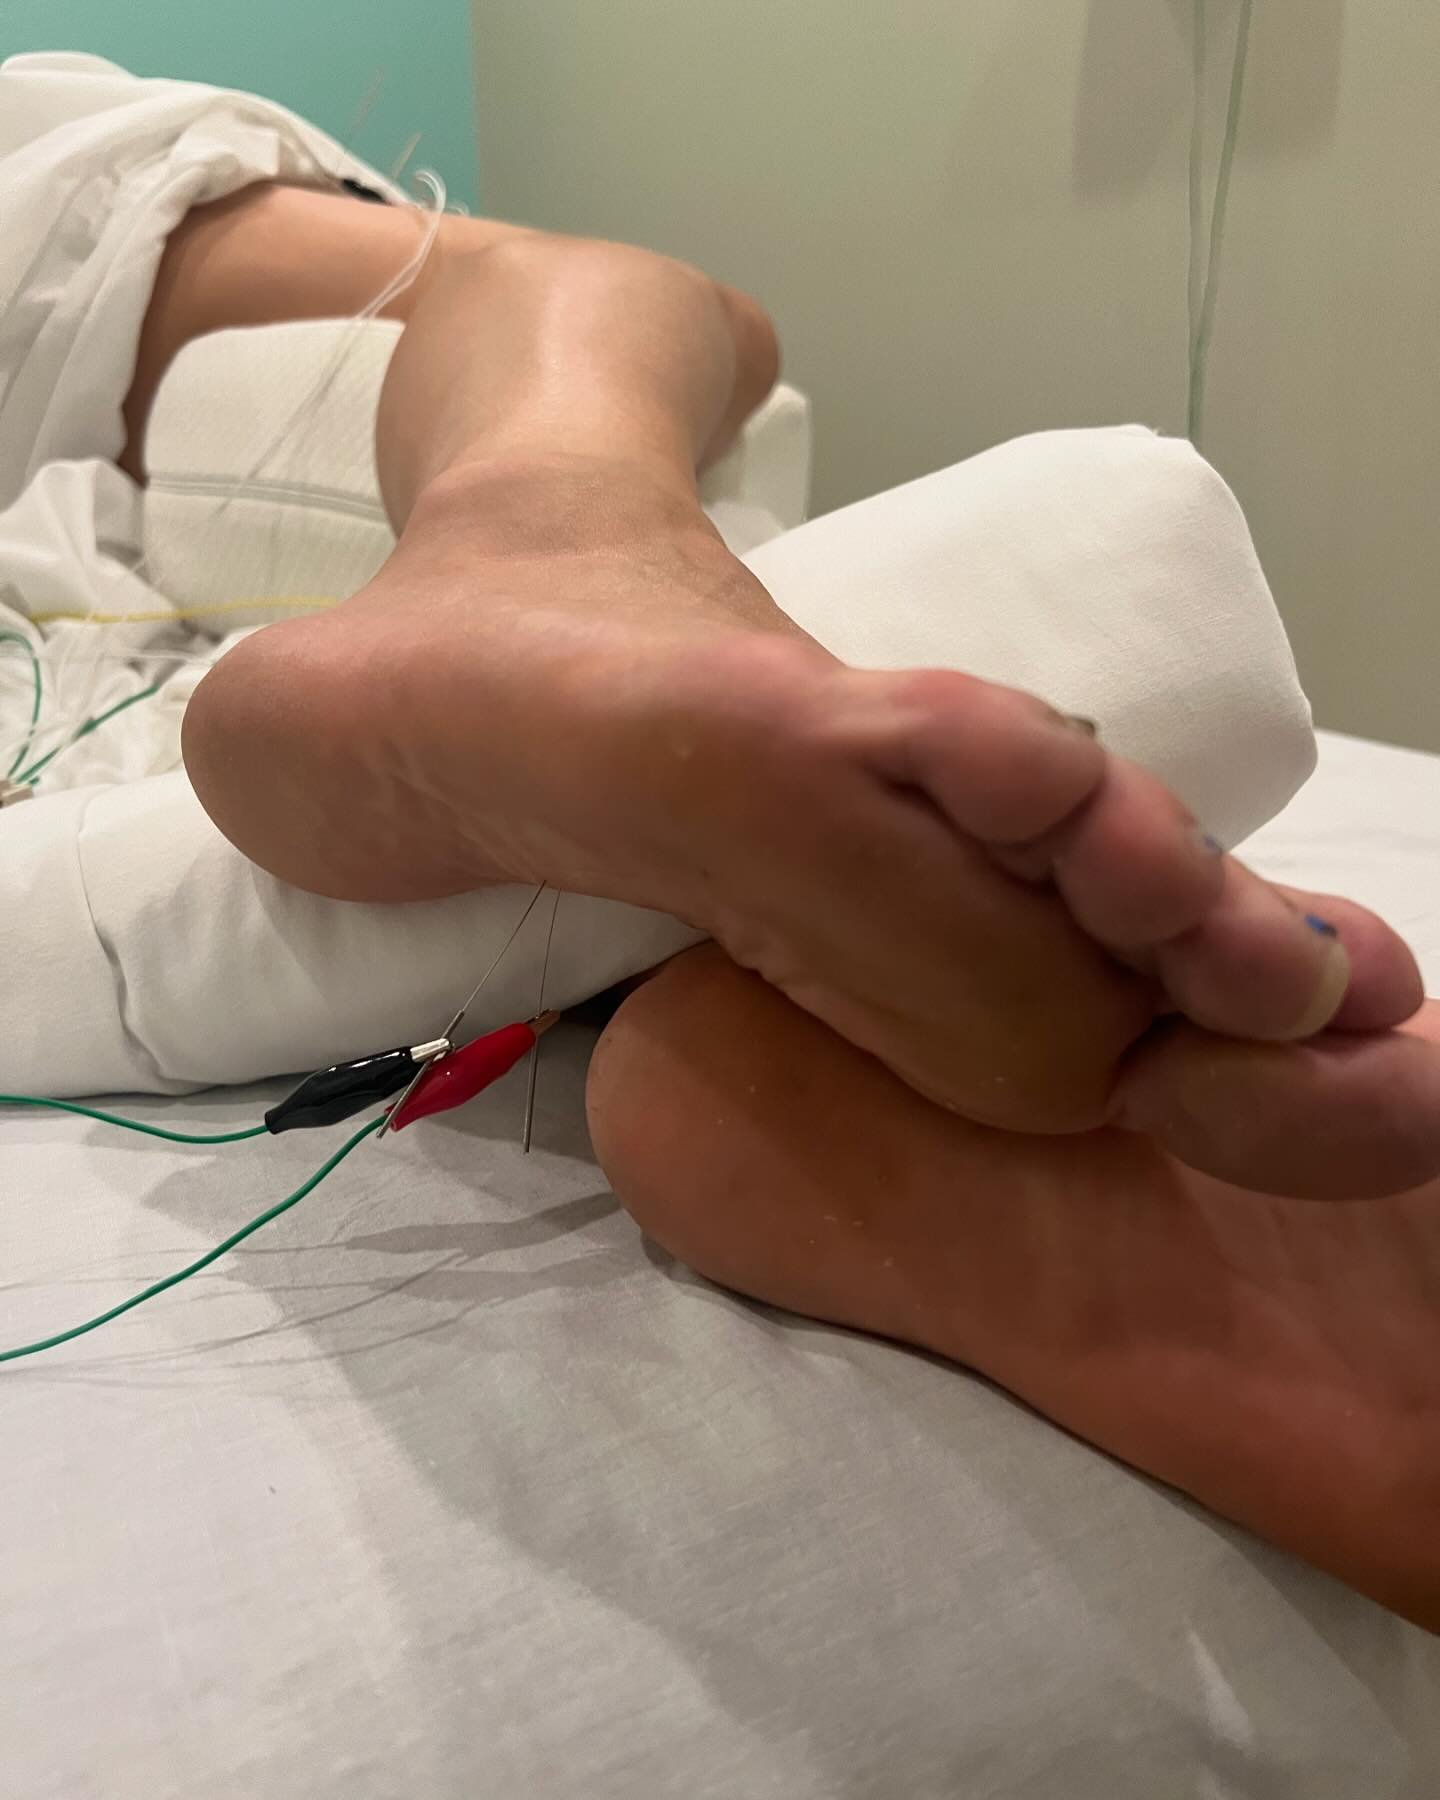 This patient developed pain in the plantar aspect of their foot from repetitive strain of the flexor digitorum brevis of their foot after an ultra-marathon.

The flexor digitorum brevis muscle in the foot primarily performs the action of flexing the 